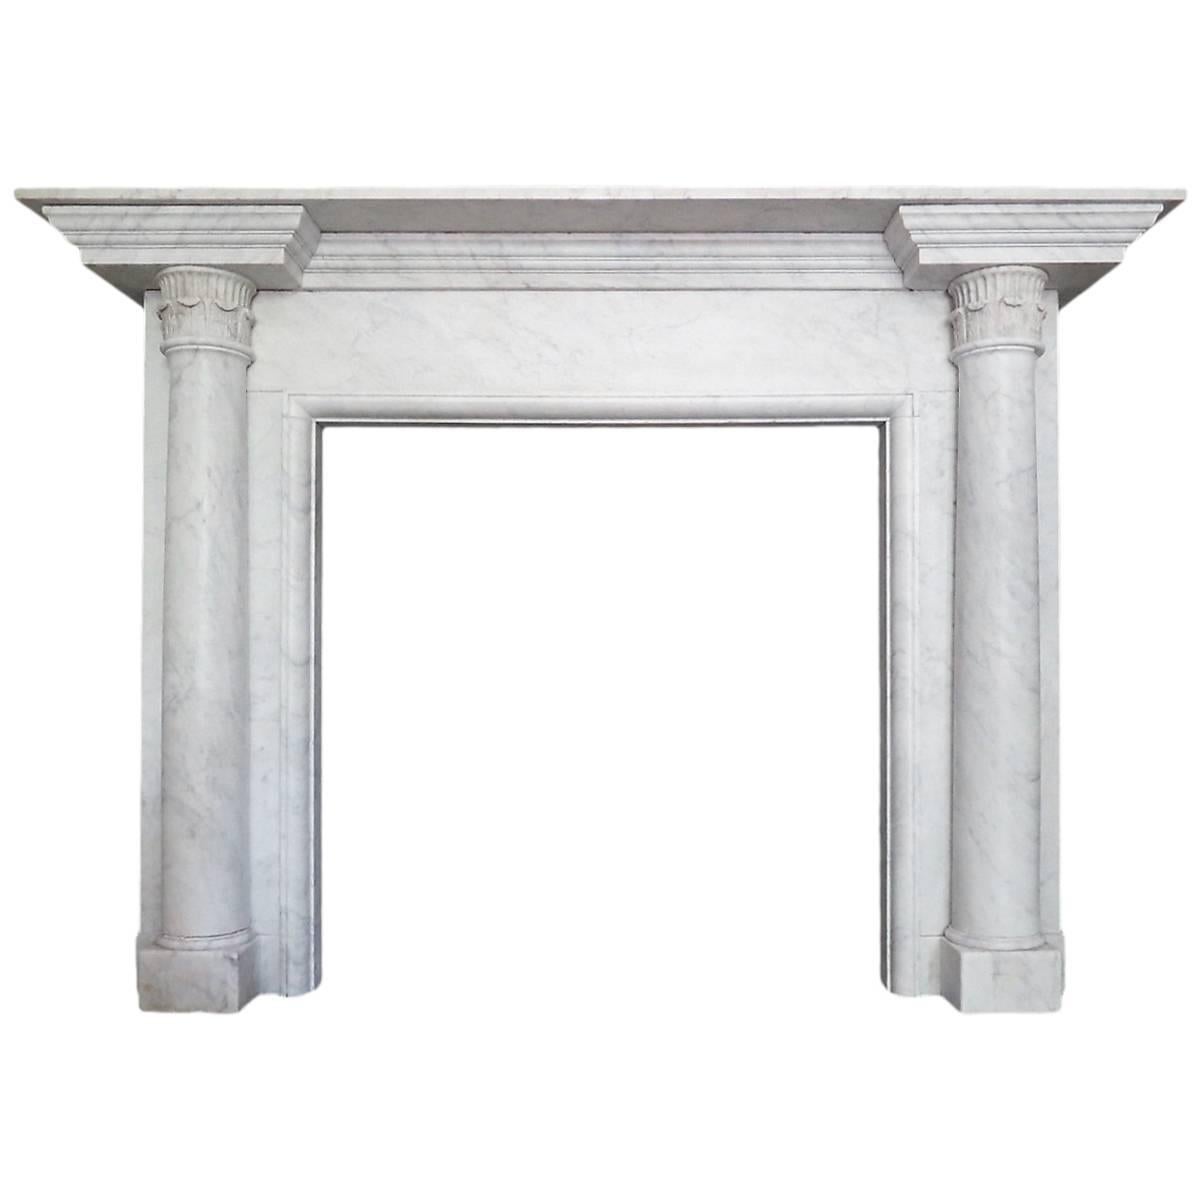 Architectural George III Fireplace Mantel in Carrara Marble